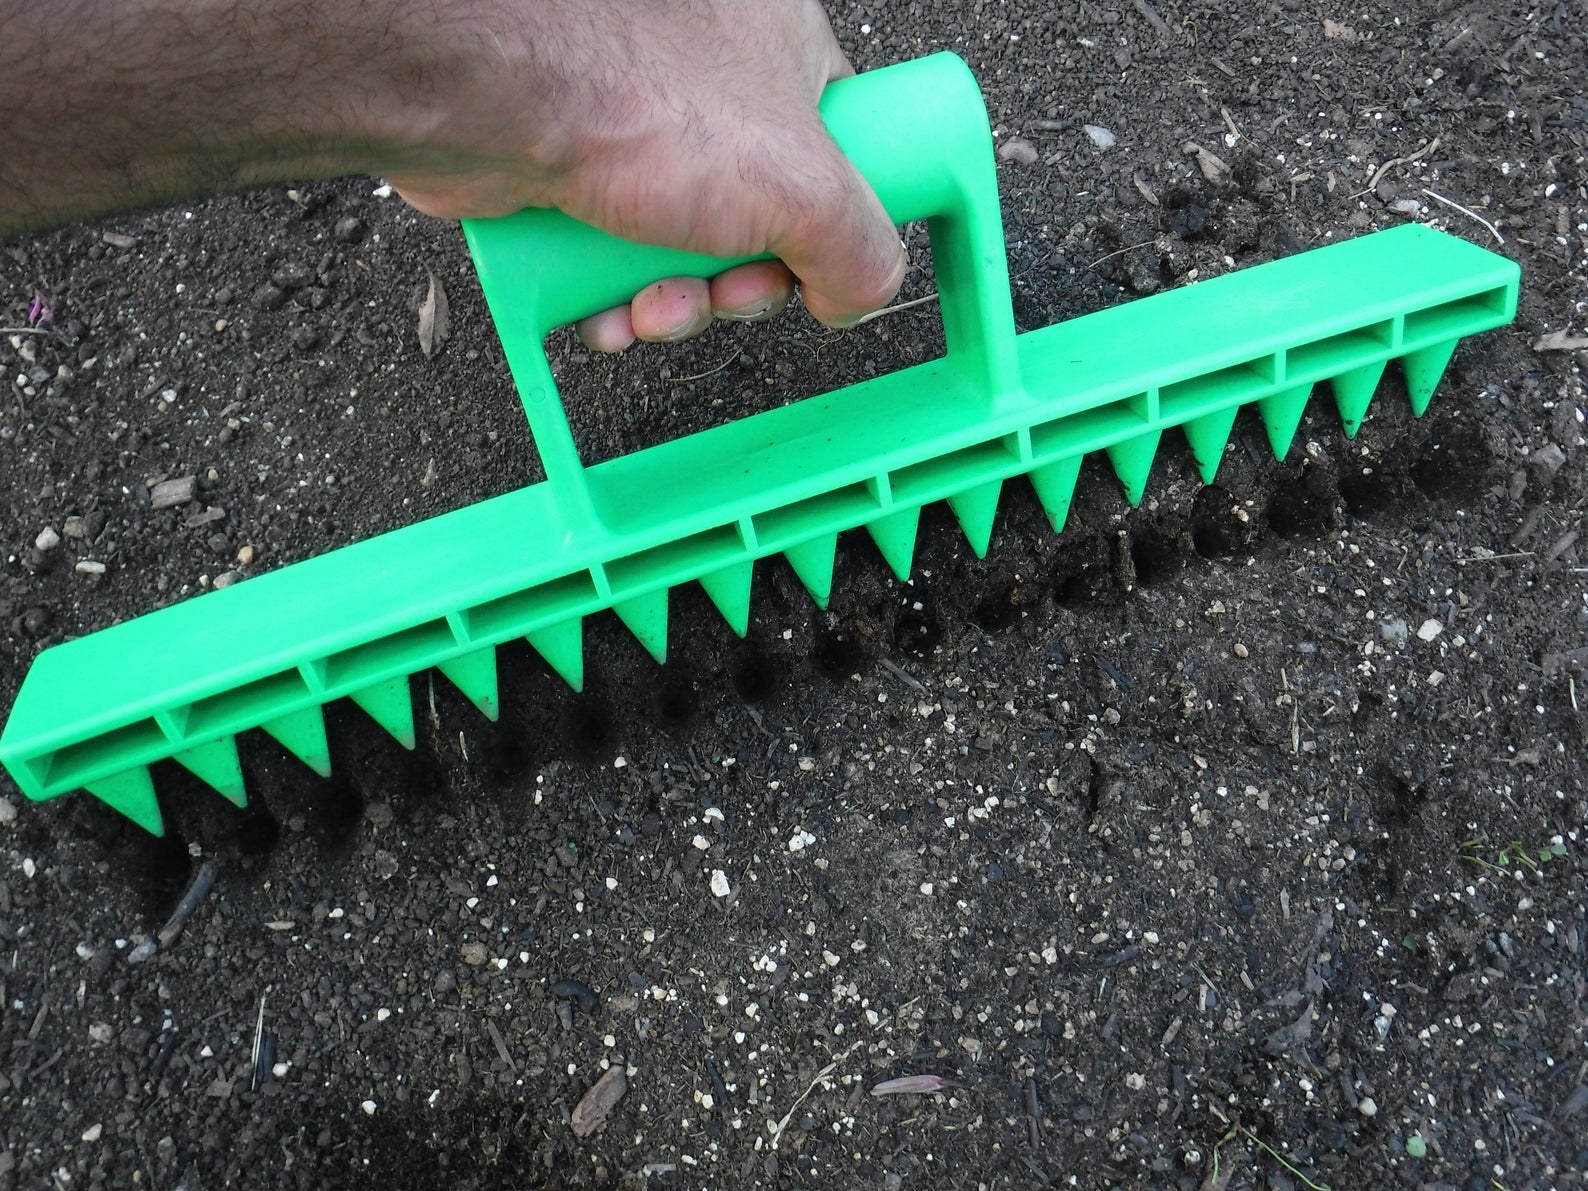 Hand using the green plastic rake tool to dig holes in soil